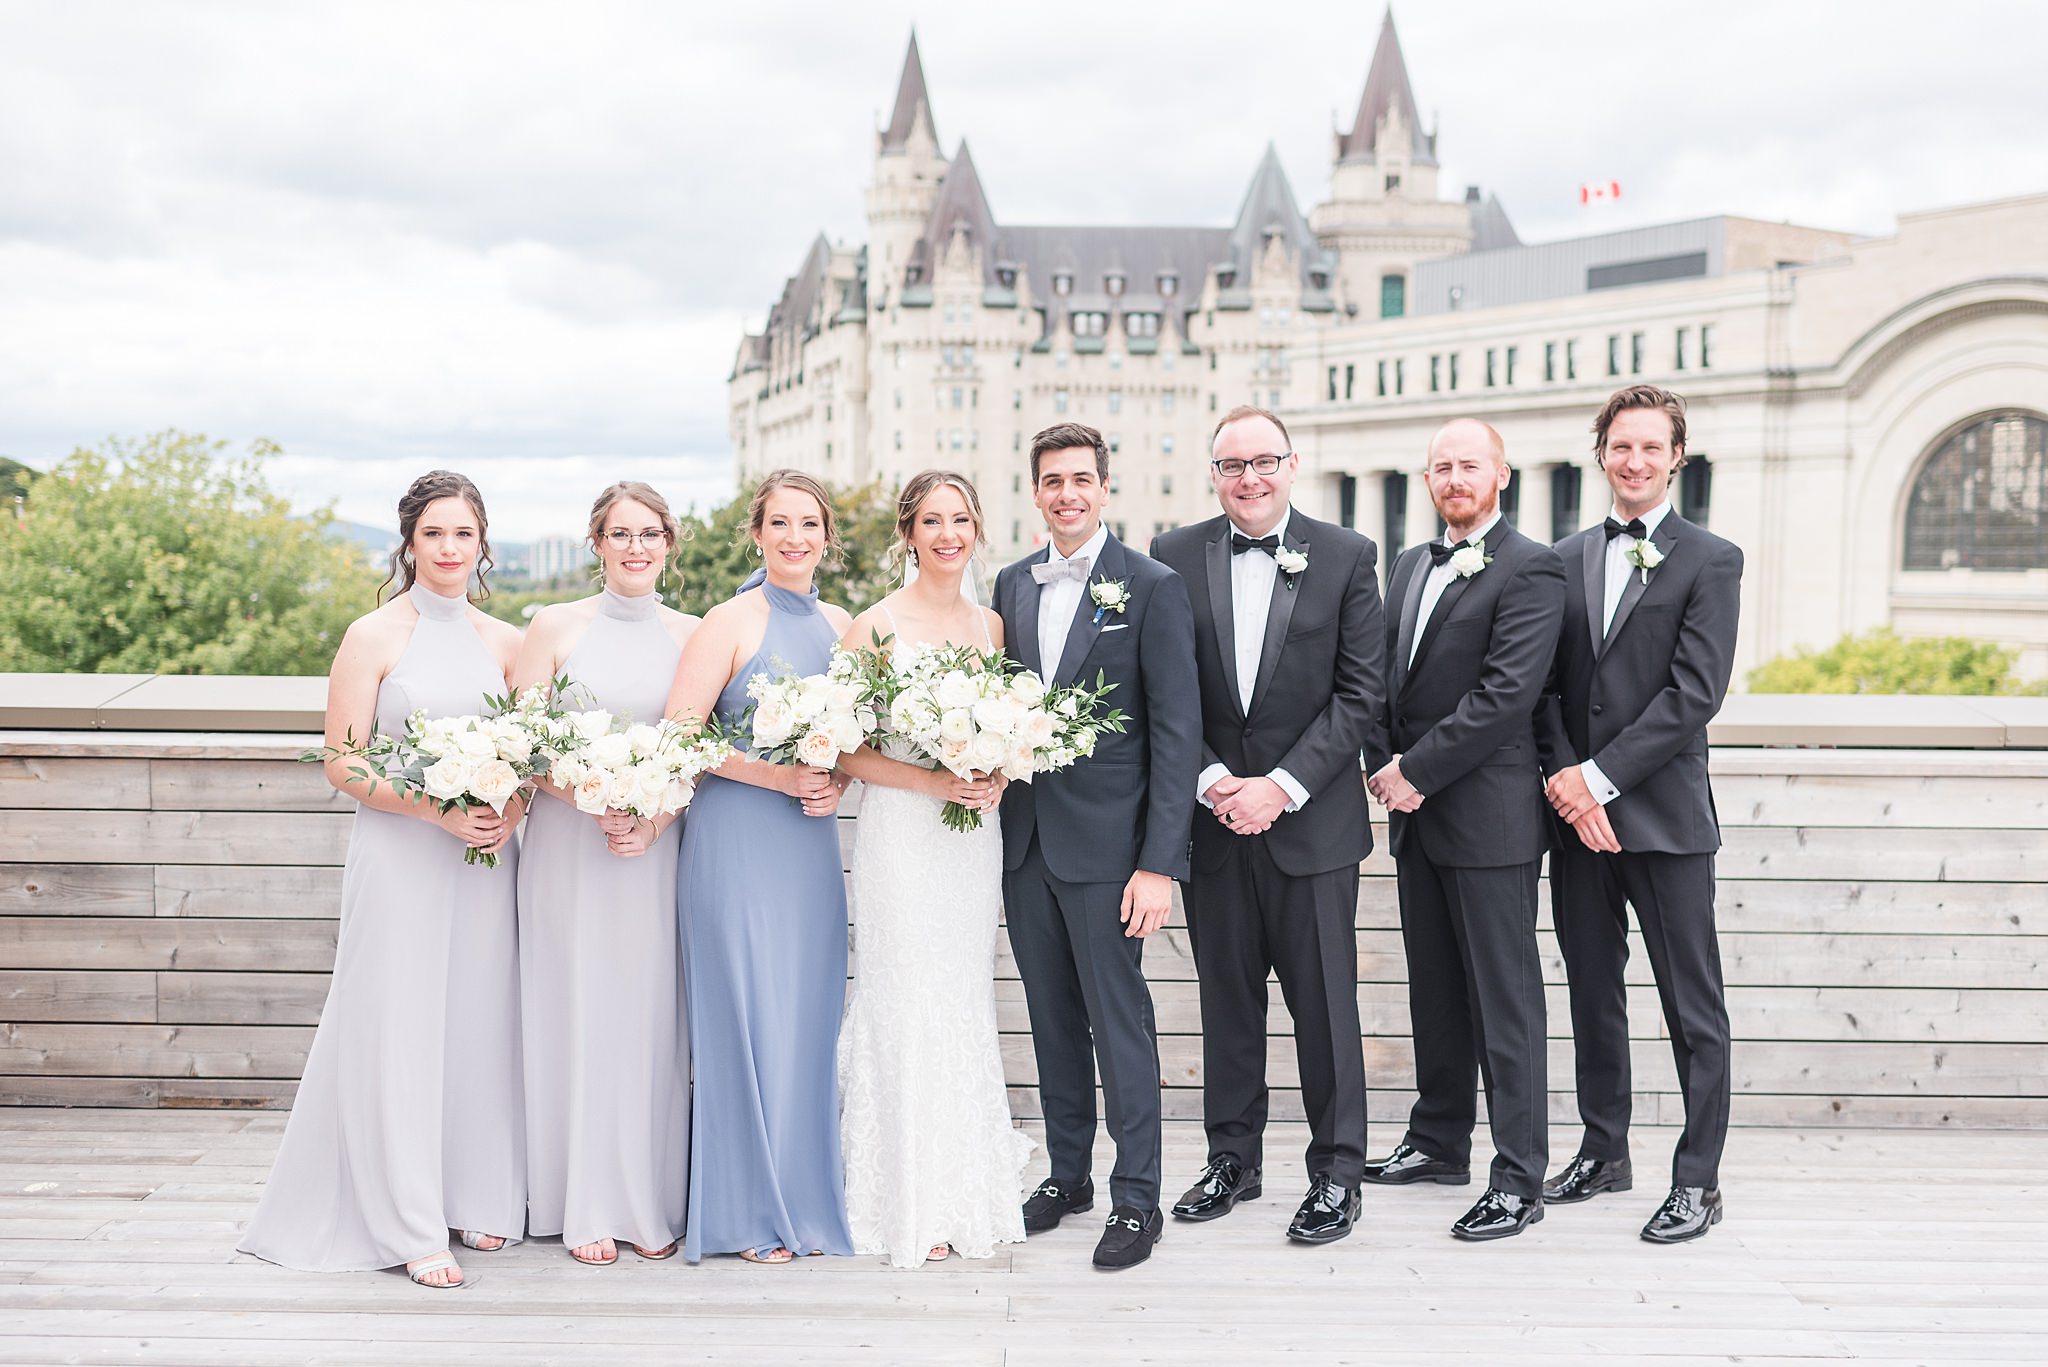 Soft Romantic Slate Blue National Arts Centre Wedding | Ottawa Wedding | Wedding photos at by the Rideau Canal downtown Ottawa Get more inspiration from this soft romantic wedding. #ottawawedding #weddingphotography #ottawaweddings